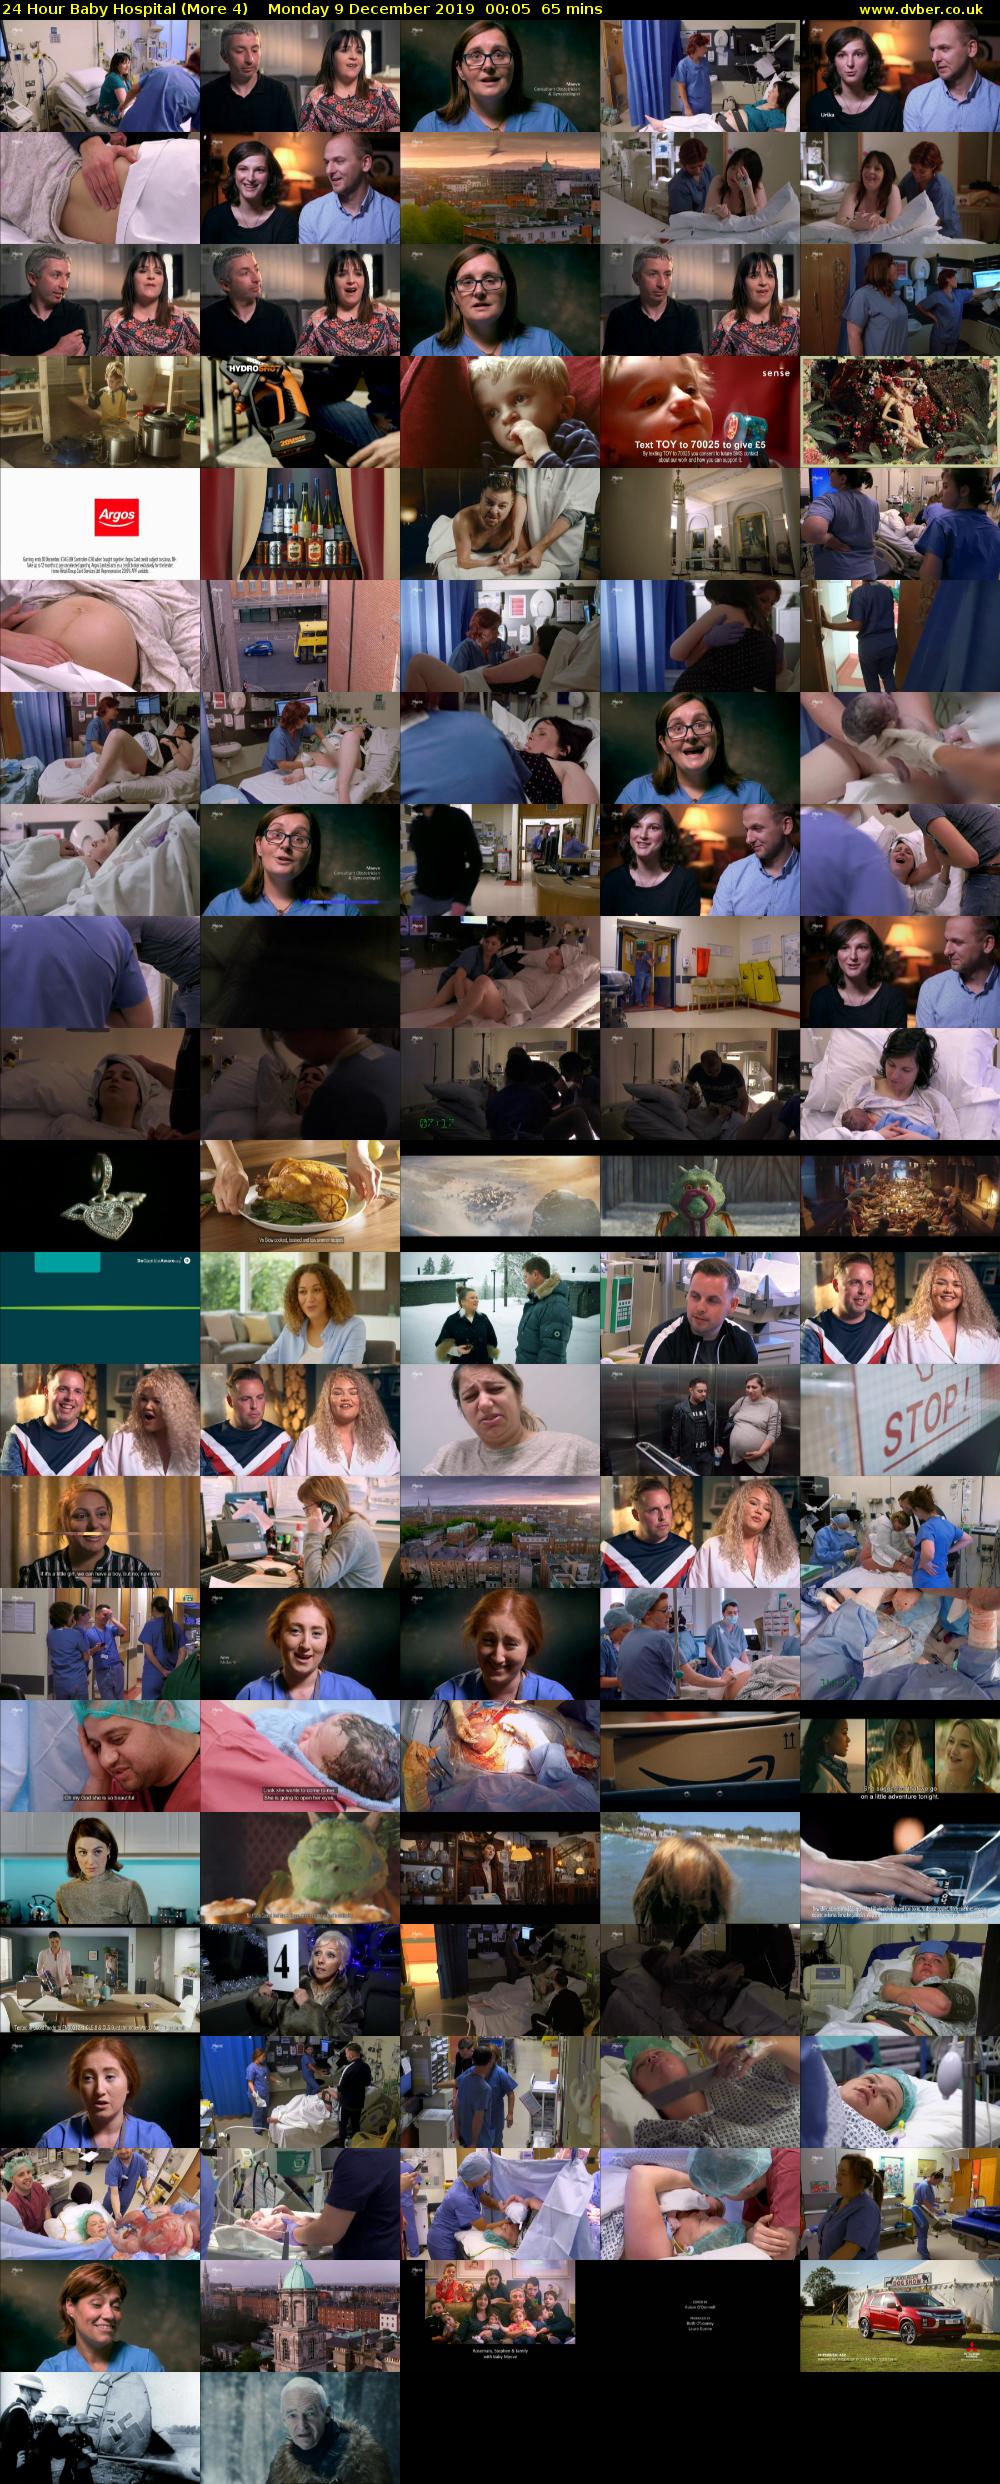 24 Hour Baby Hospital (More 4) Monday 9 December 2019 00:05 - 01:10